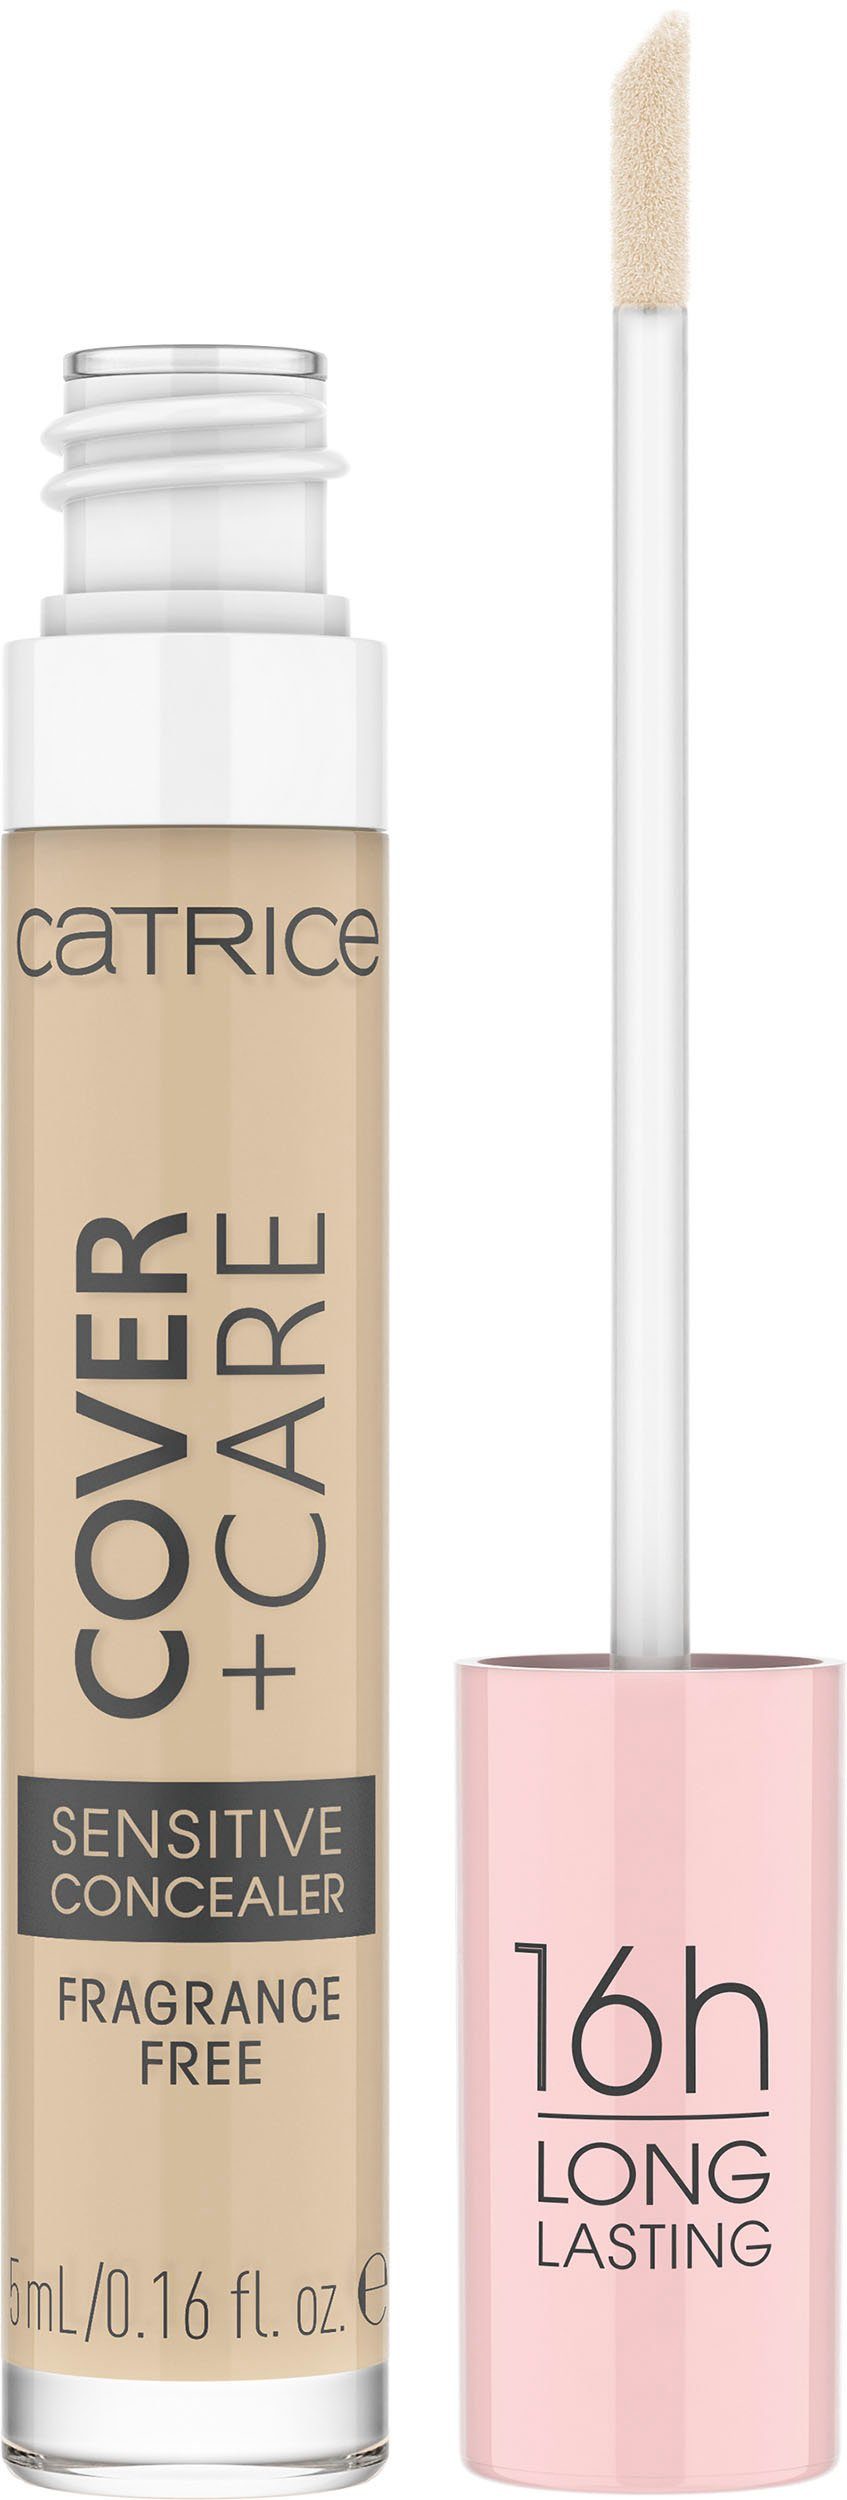 Catrice Concealer Catrice Cover + Sensitive Care 002N Concealer, nude 3-tlg